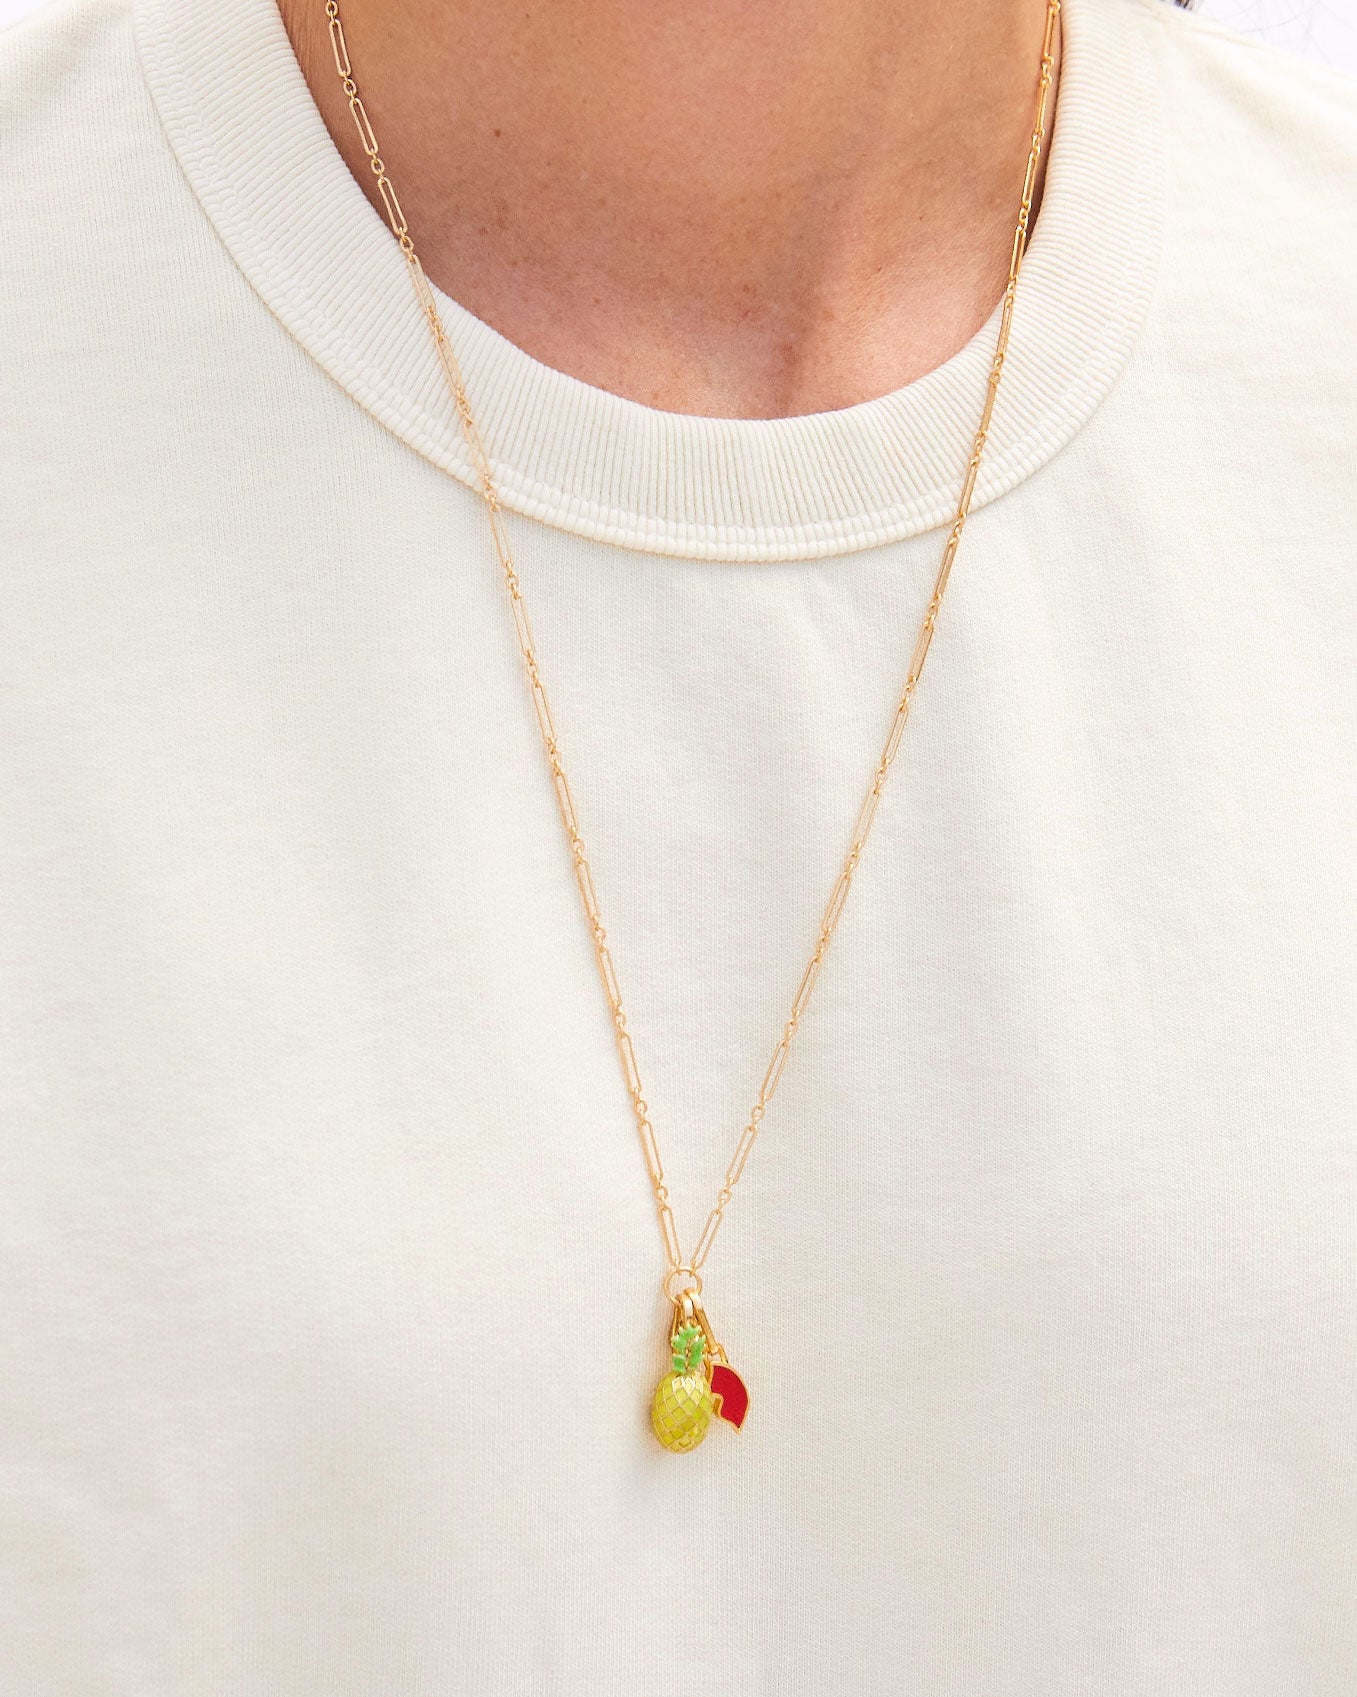 Yellow Pineapple Charm on the Paperclip Charm Chain with the Red Lips Charm